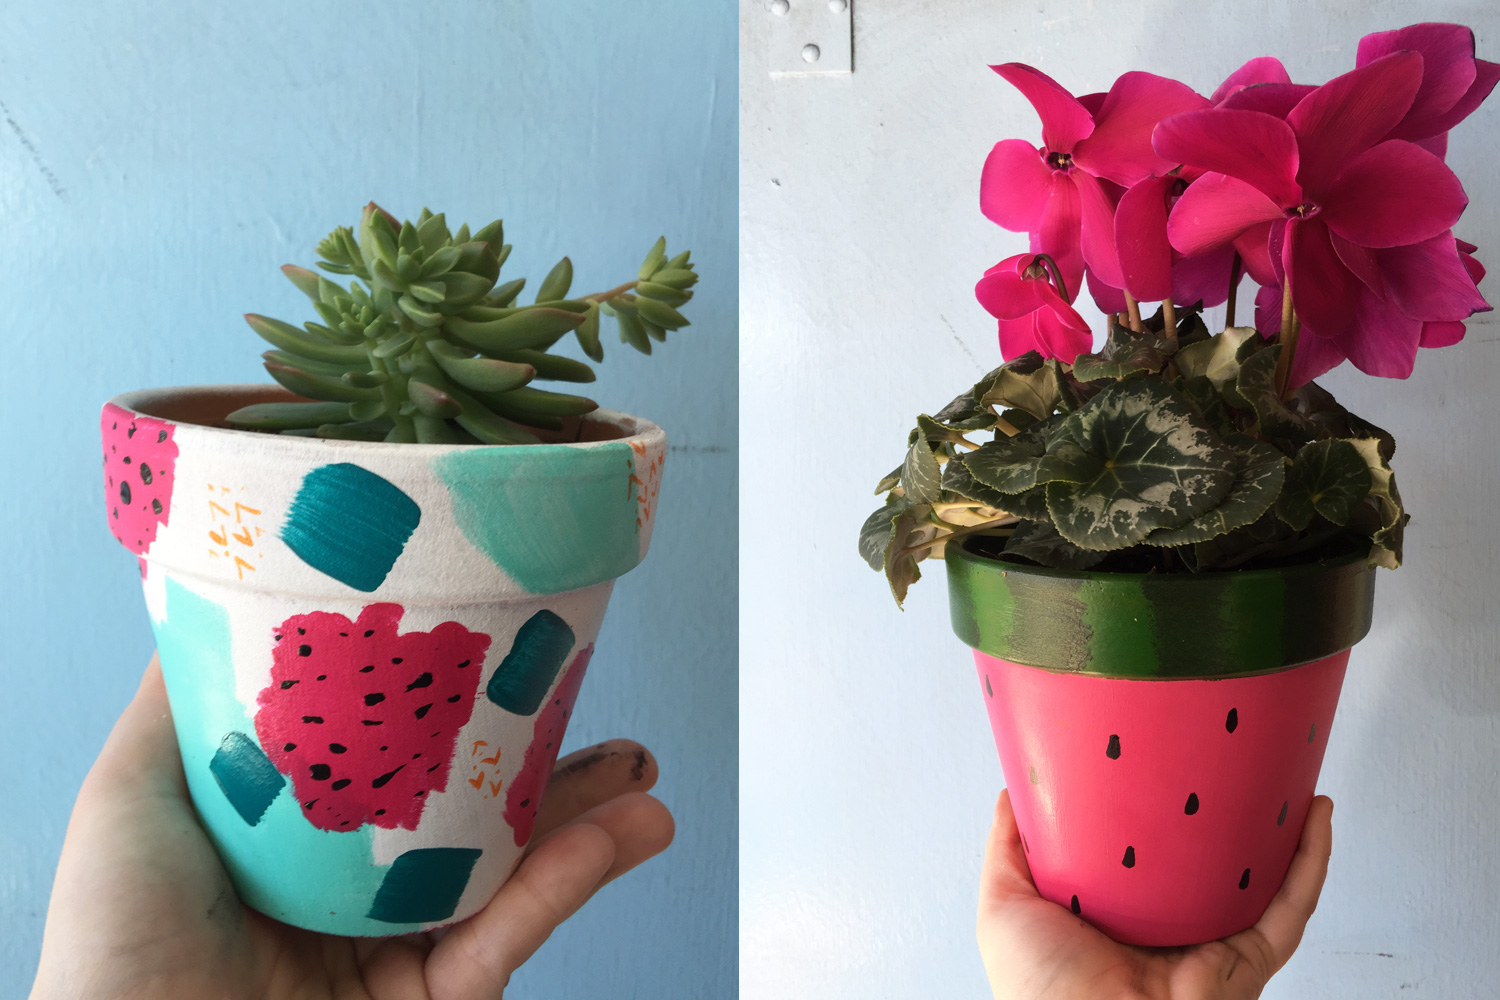 How to Paint Garden Pots and Planters